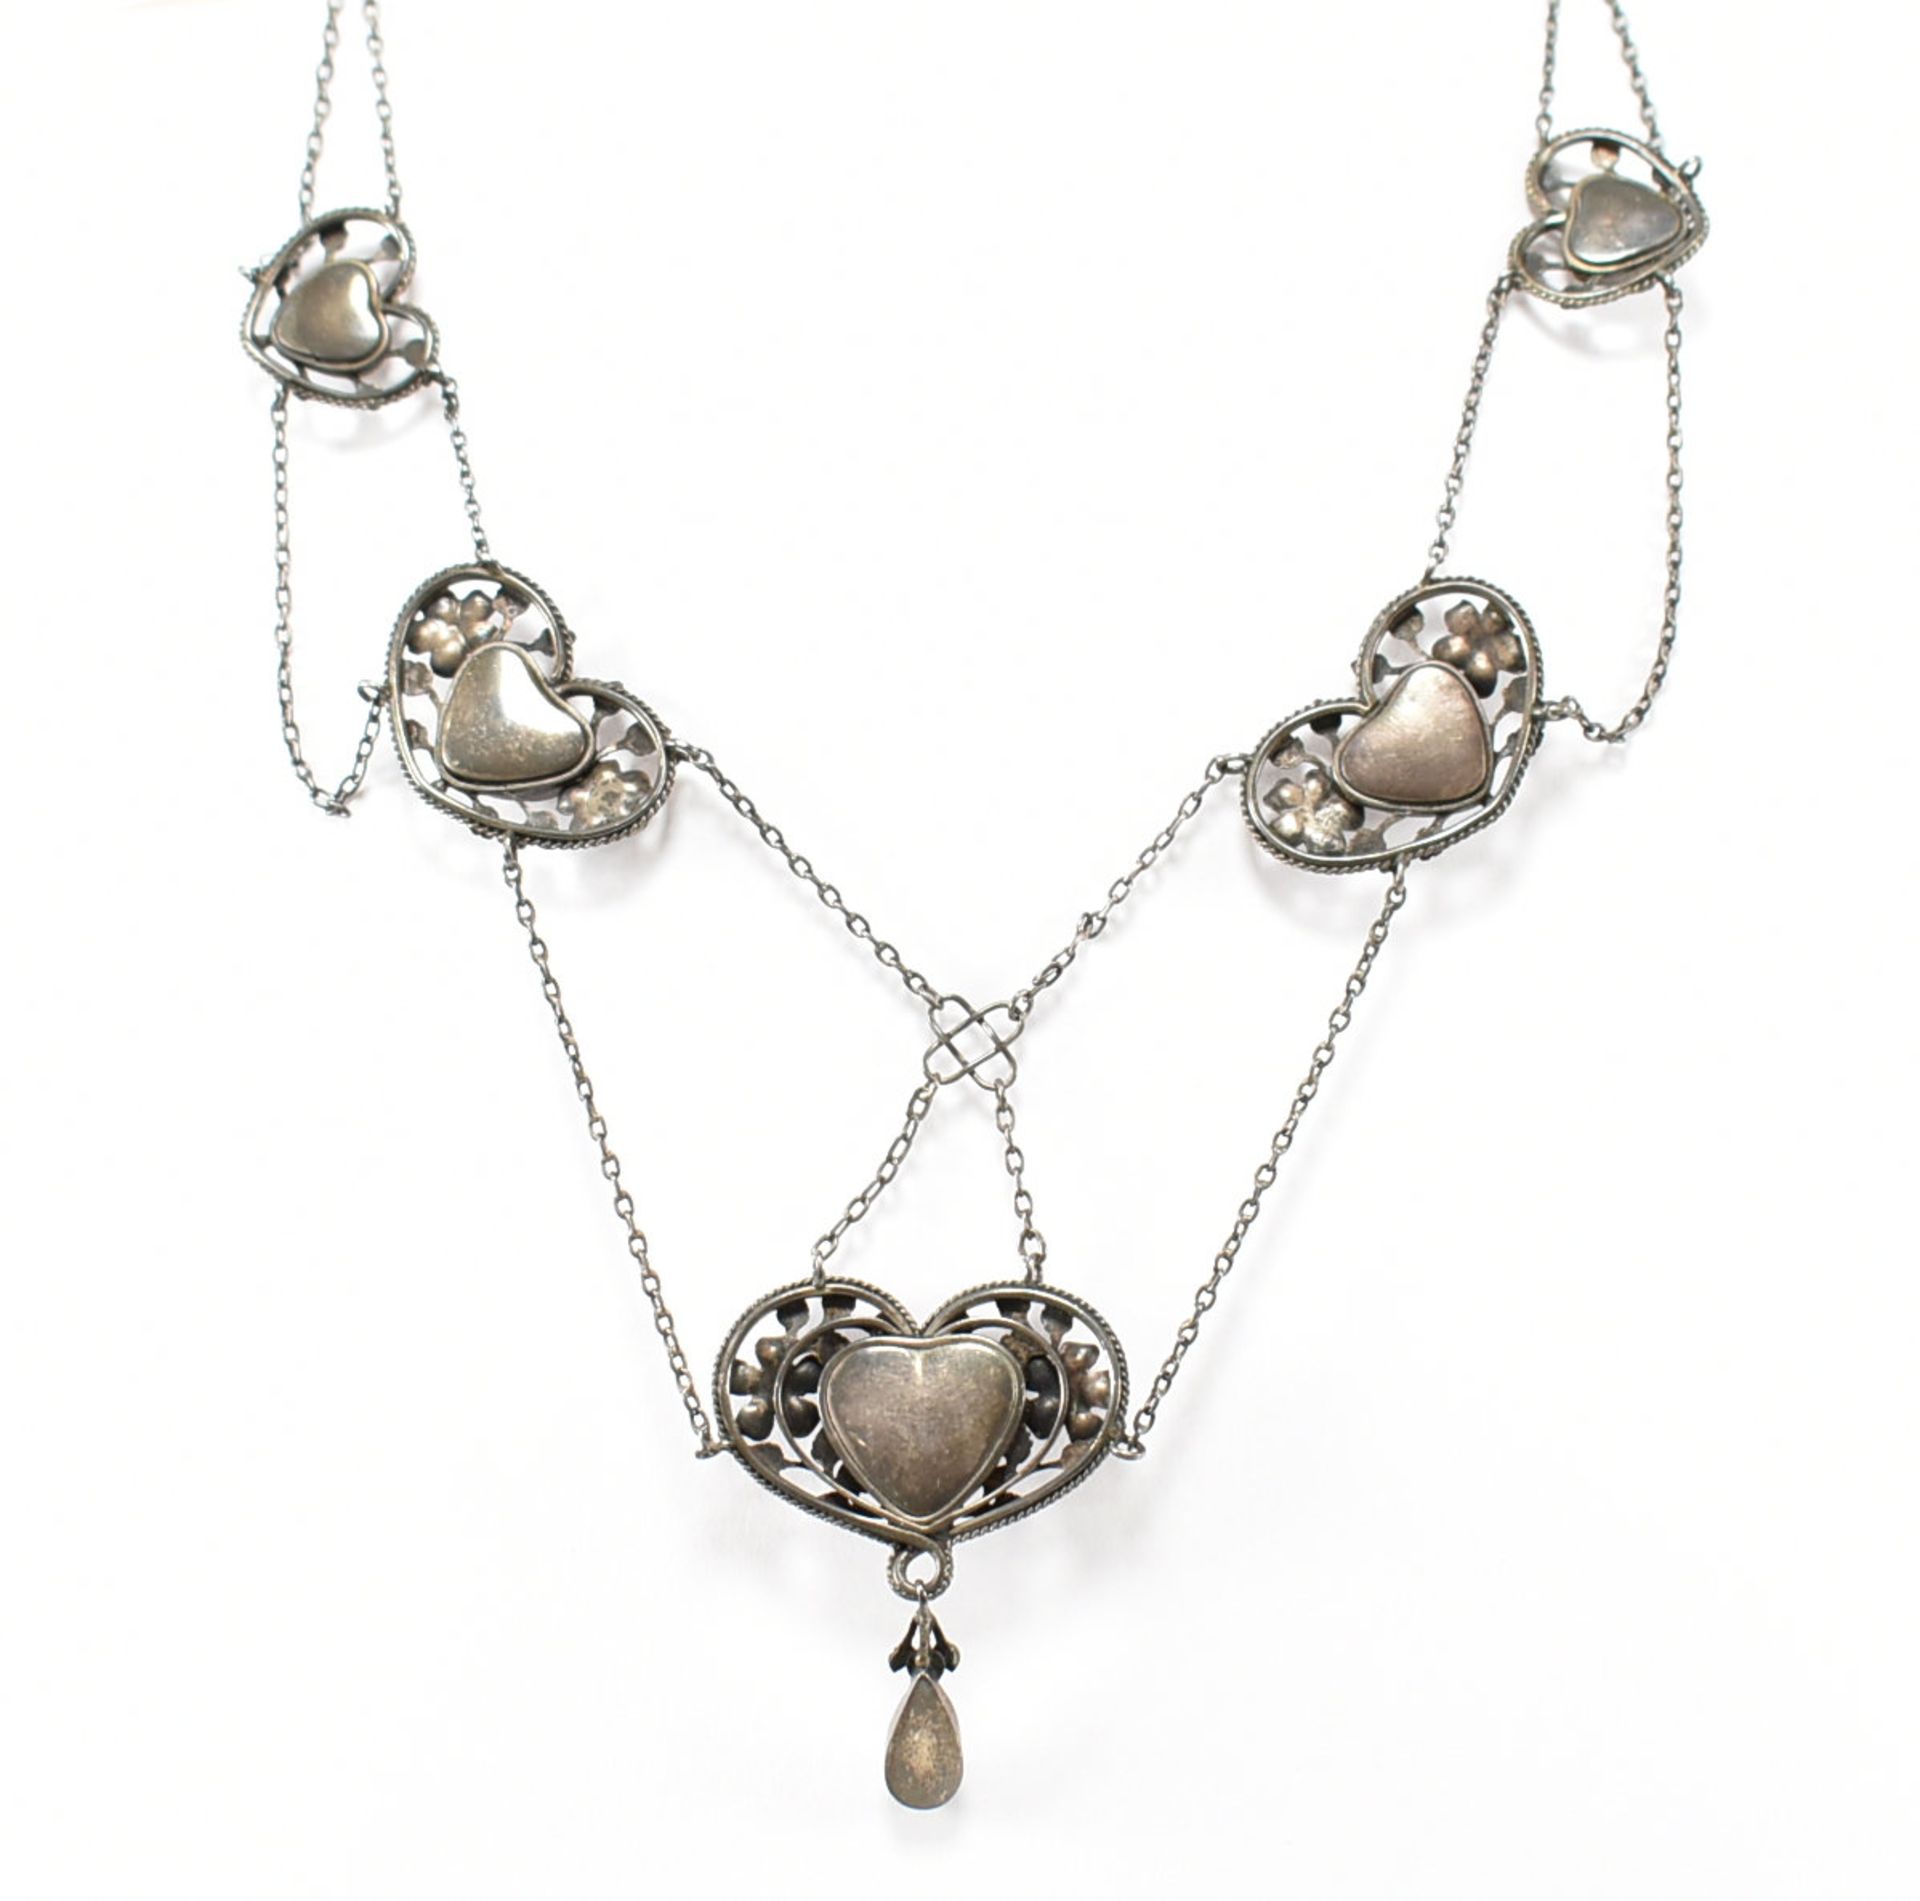 ARTS & CRAFTS SILVER & MOTHER OF PEARL HEART NECKLACE - Image 6 of 11